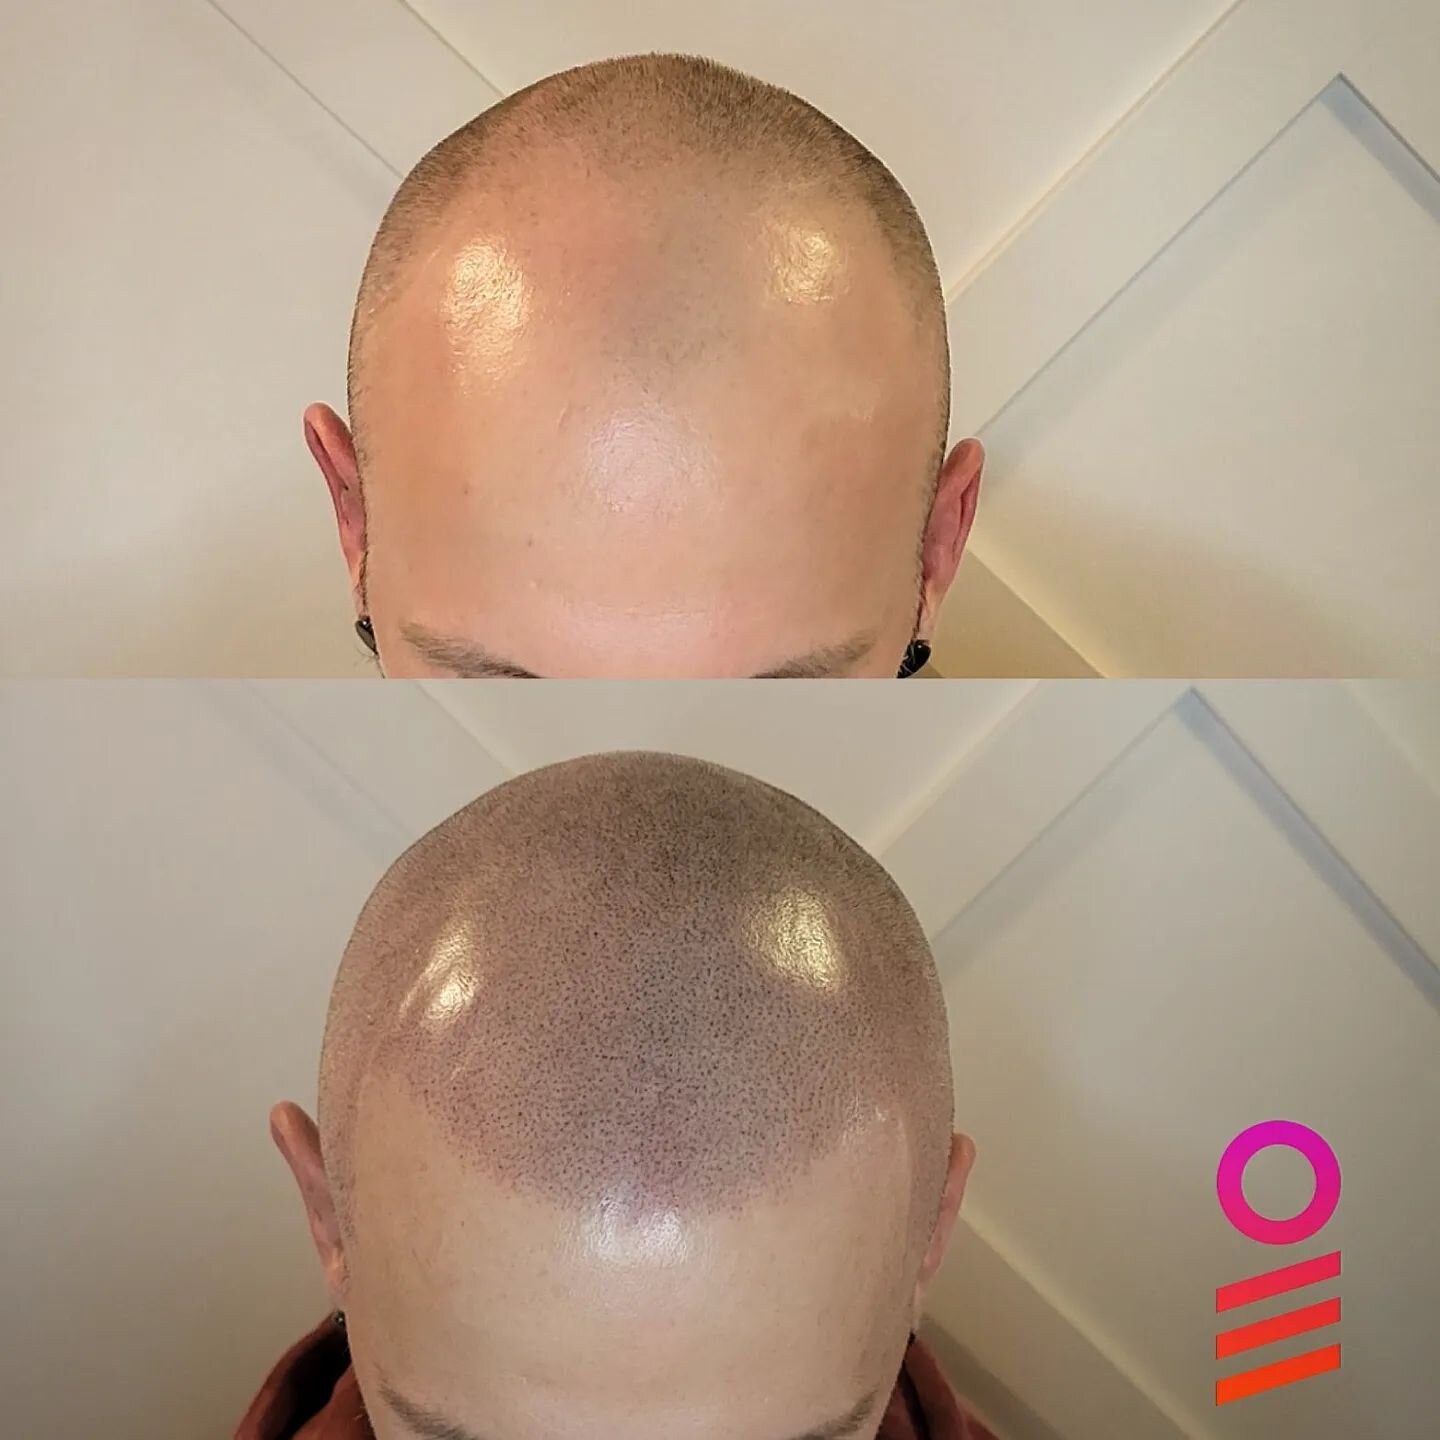 Start your 2023 off looking and feeling awesome! Book your consultation now at inkbarber.com! 📱 Transformation by @theinkbarber 
.
#smptraining #smp #scalpmicropigmentation #transformation #beforeandafter #hair #tattoo #barber